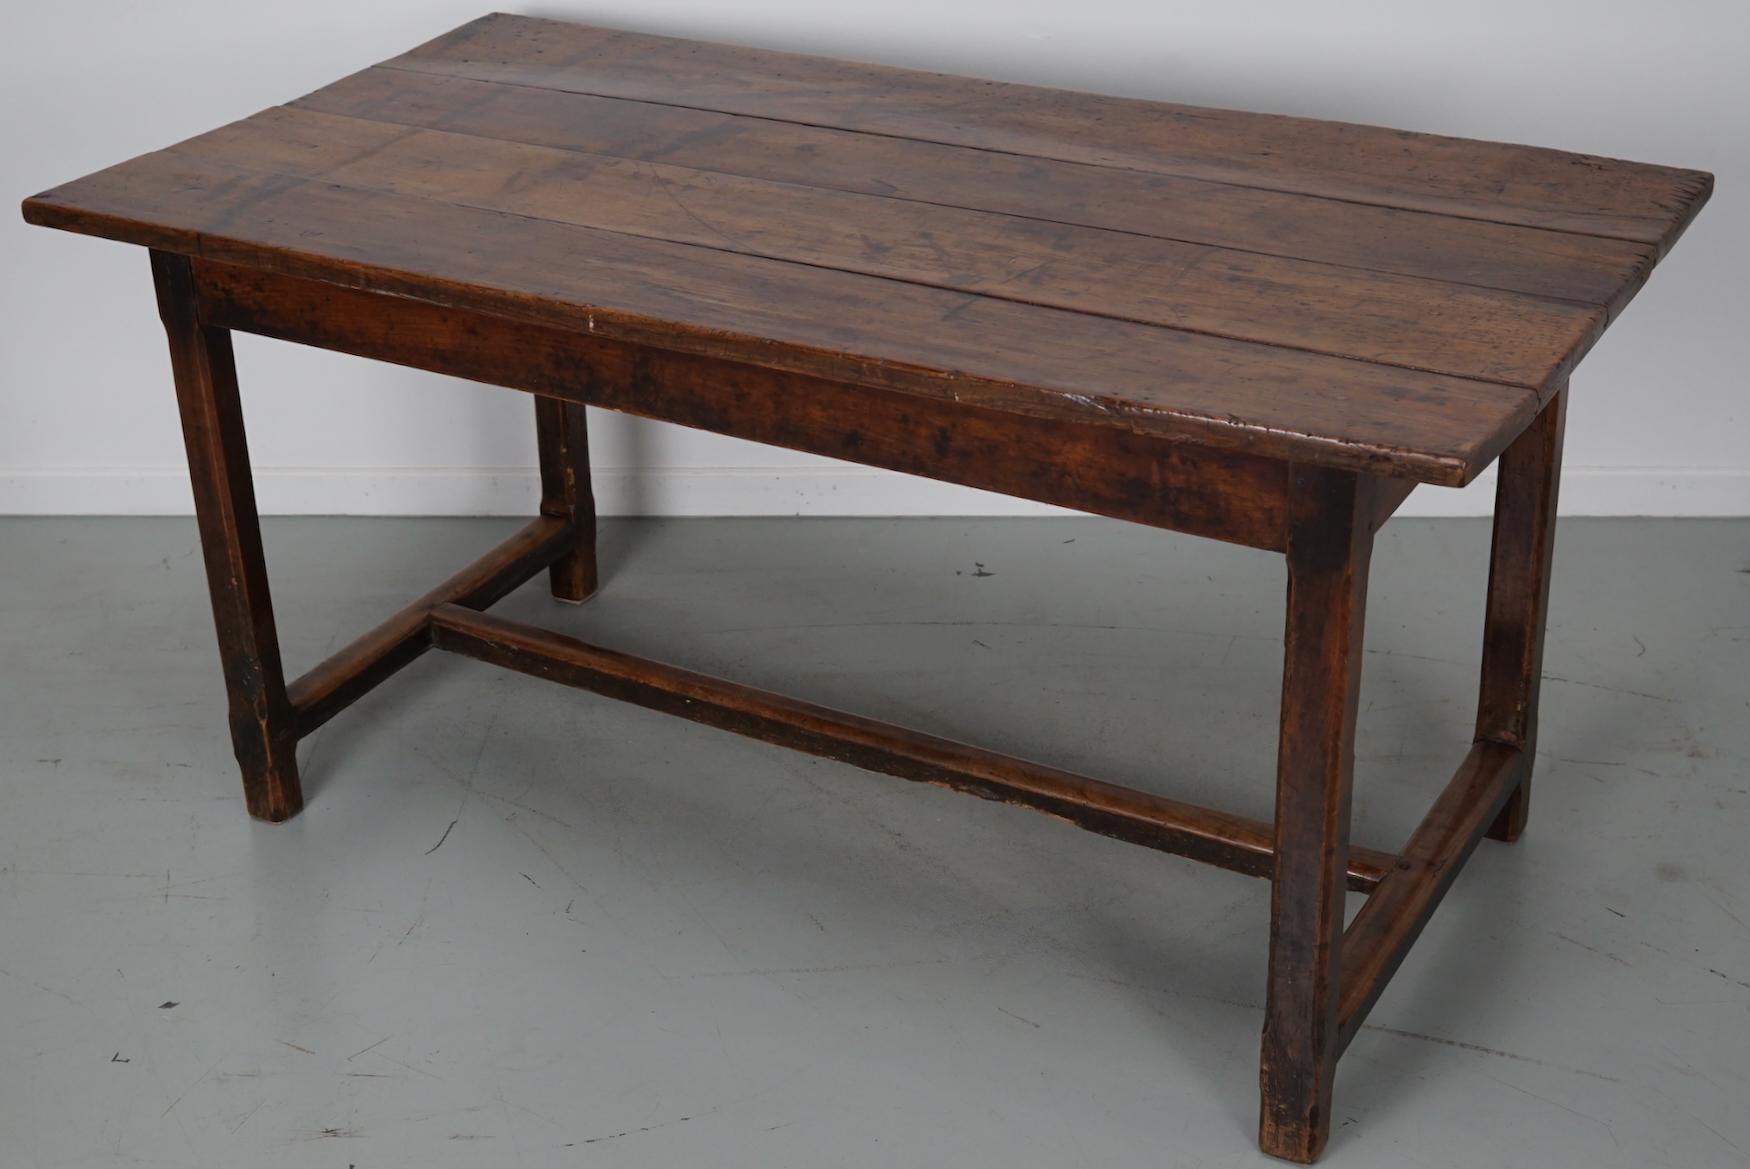 This elegant table was made in France in the 19th century. The table was made in solid fruitwood with beautiful grain patterns. It has a very warm color and the table shows marks of use, old repairs and a has a great patina. The knee height is 61 cm.